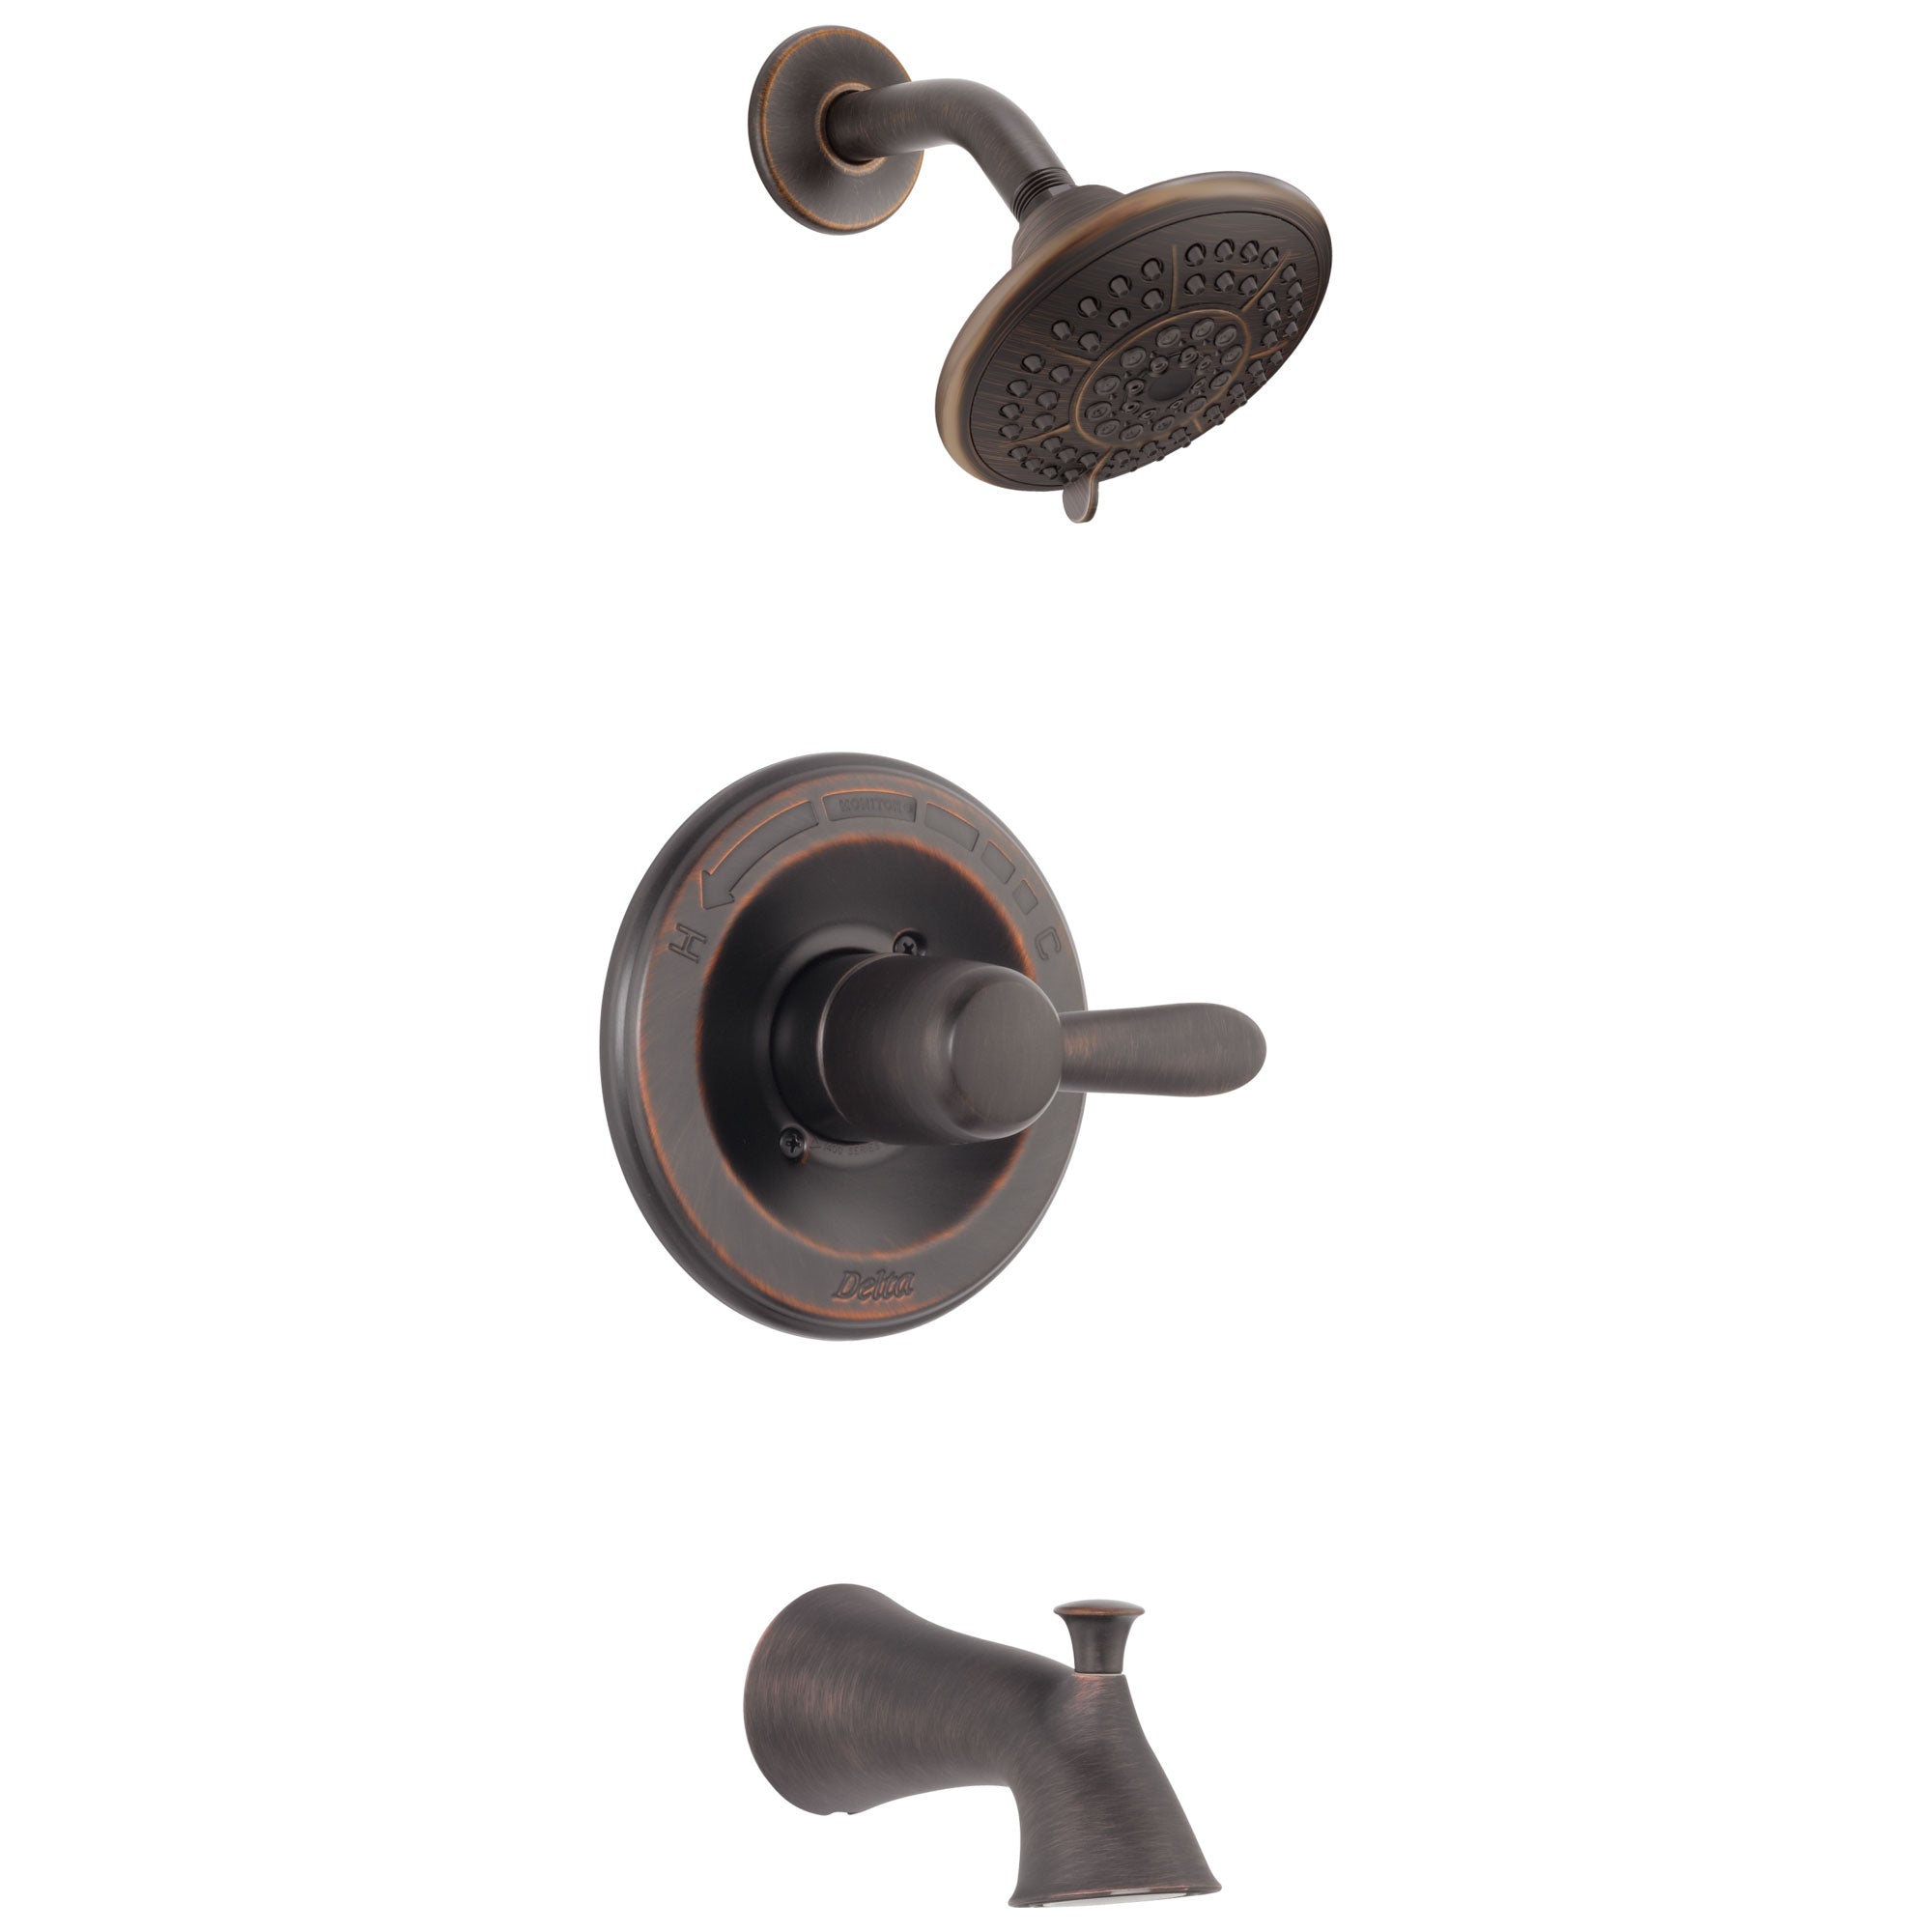 Delta Lahara Venetian Bronze Tub and Shower Combination Faucet with Valve D242V